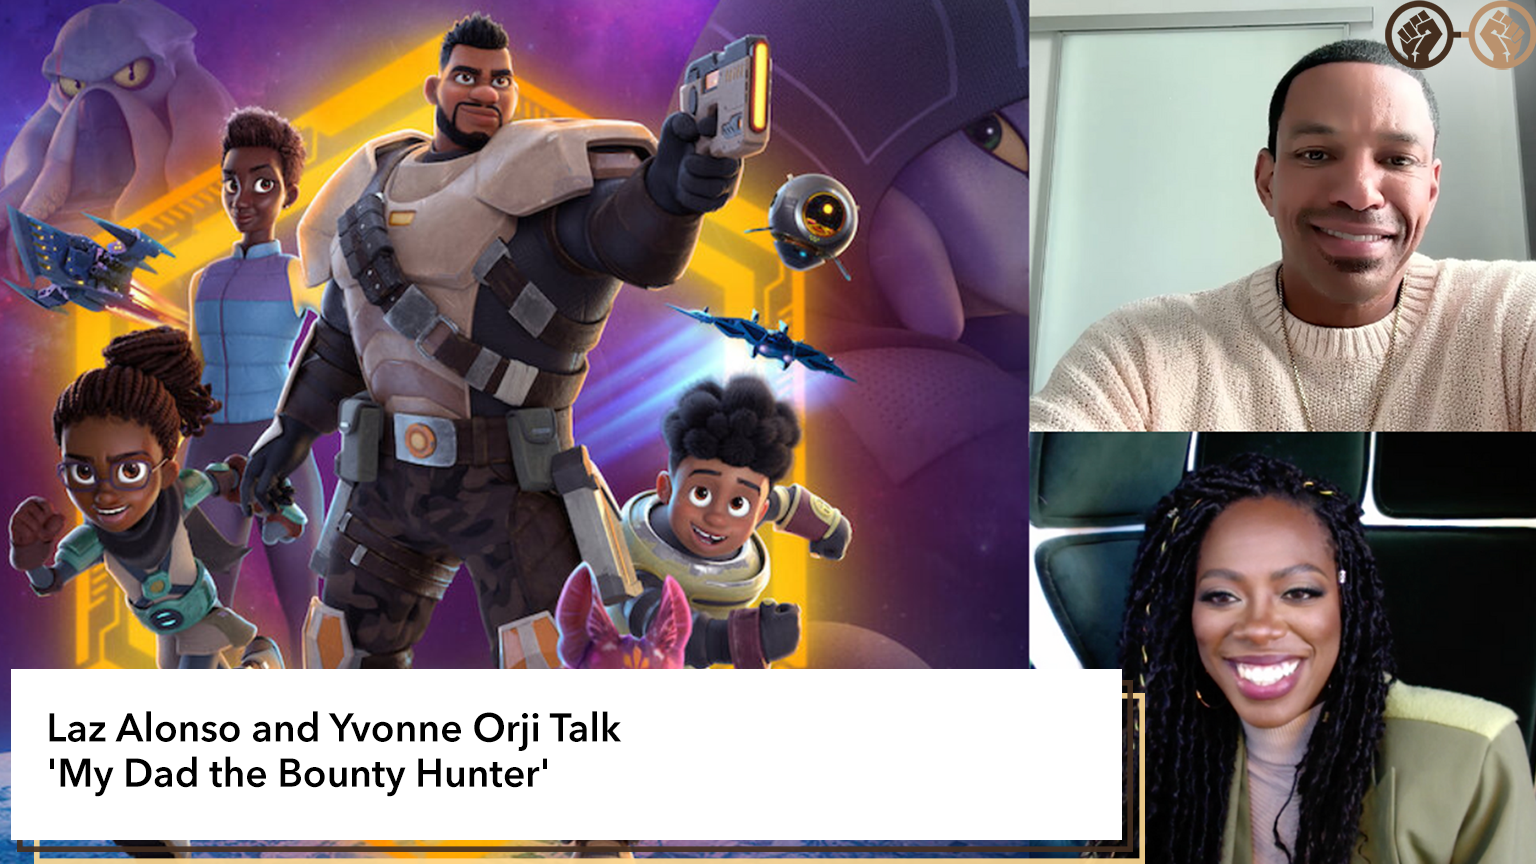 Laz Alonso And Yvonne Orji Talk ‘My Dad the Bounty Hunter’ & Bringing A Black Family Into Space – Interview